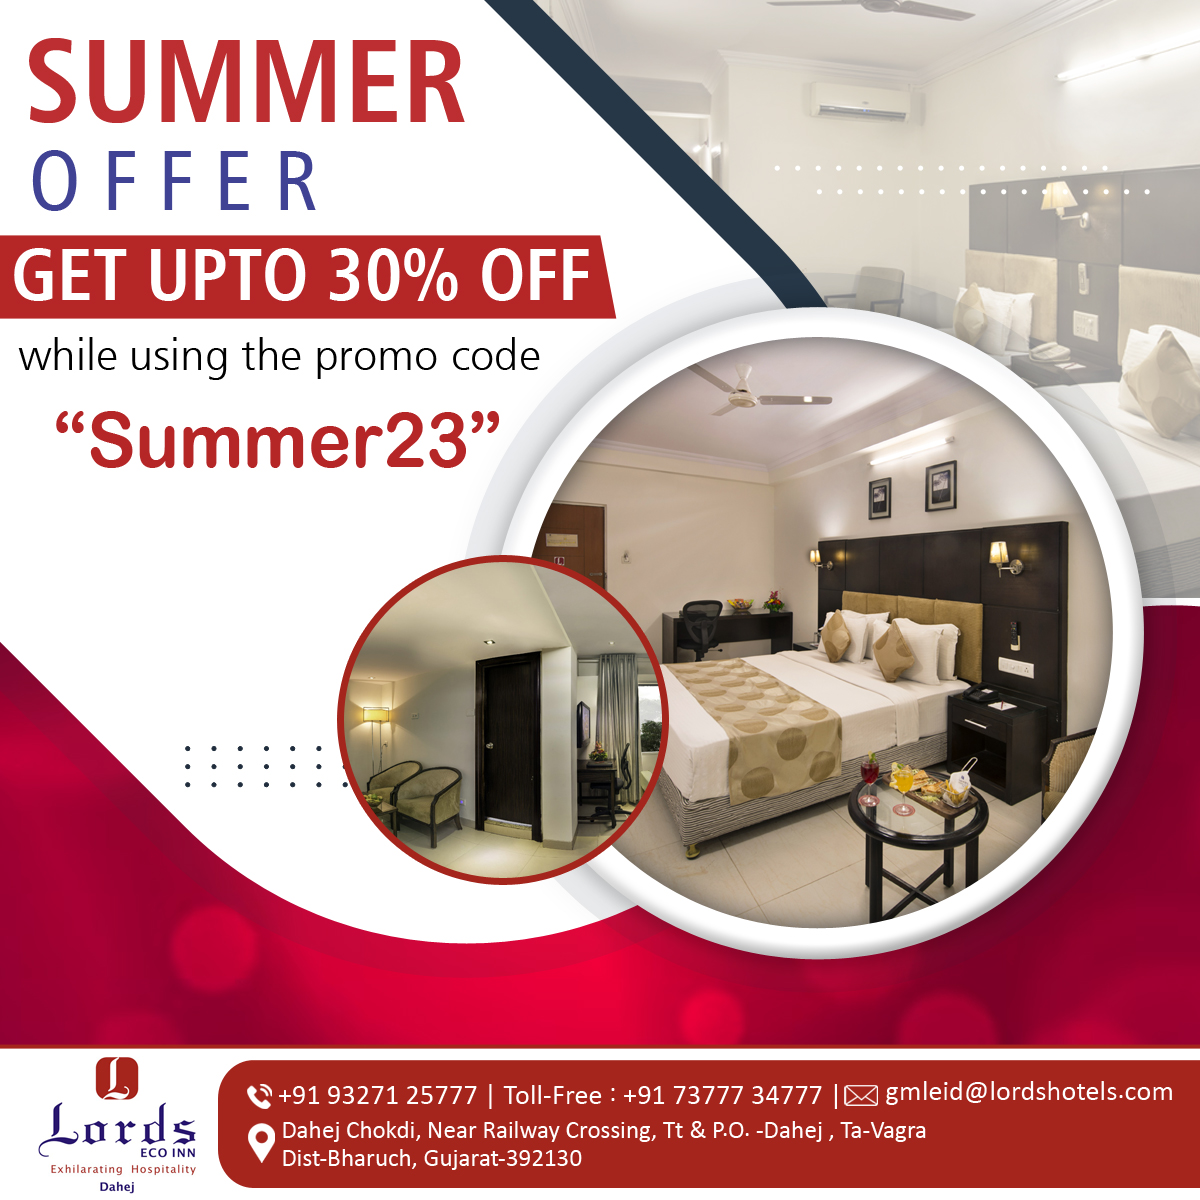 Get up to 30% off on room booking by using promo code'summer23'. Book your stay today!

For Bookings, Contact: WhatsApp: wa.me/+919327125777
Website:- bit.ly/3L30LoI
Follow Us on Instagram: bit.ly/3NblhpH

#summeroffer #promotion #lordshotelsandresorts